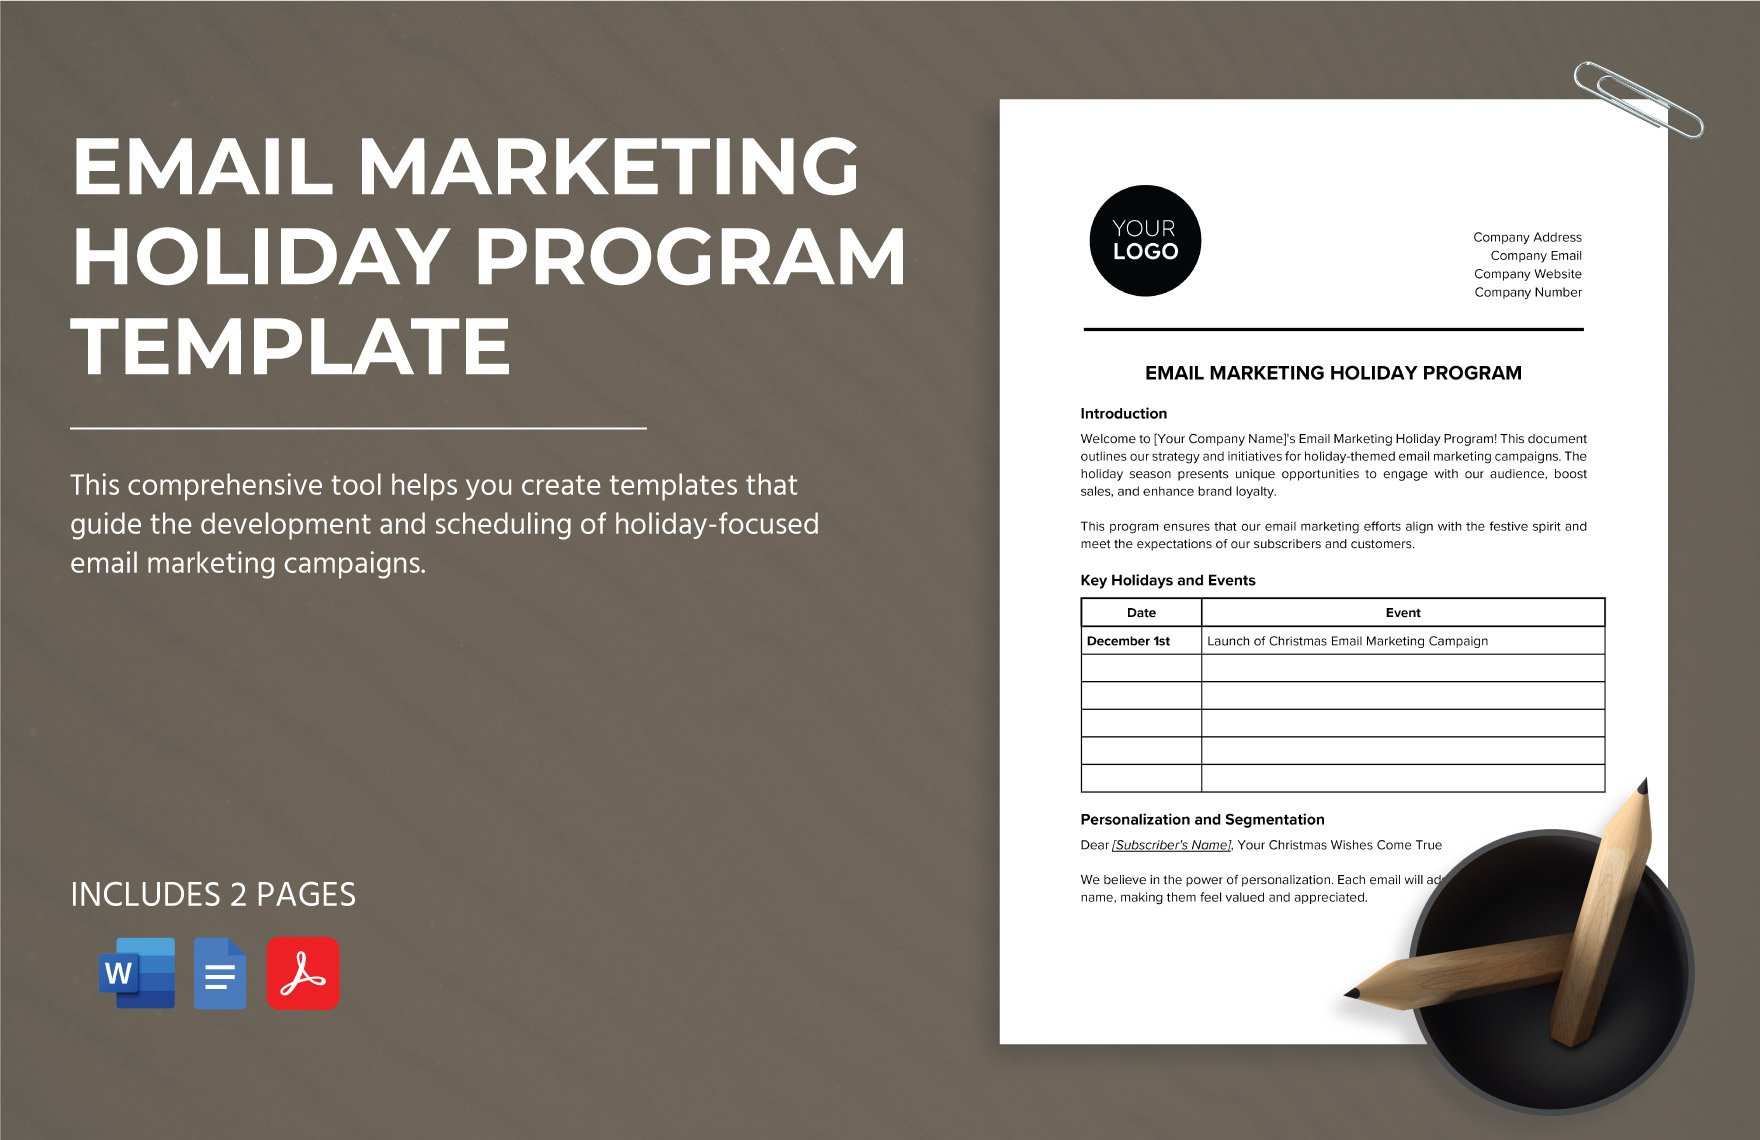 Email Marketing Holiday Program Template